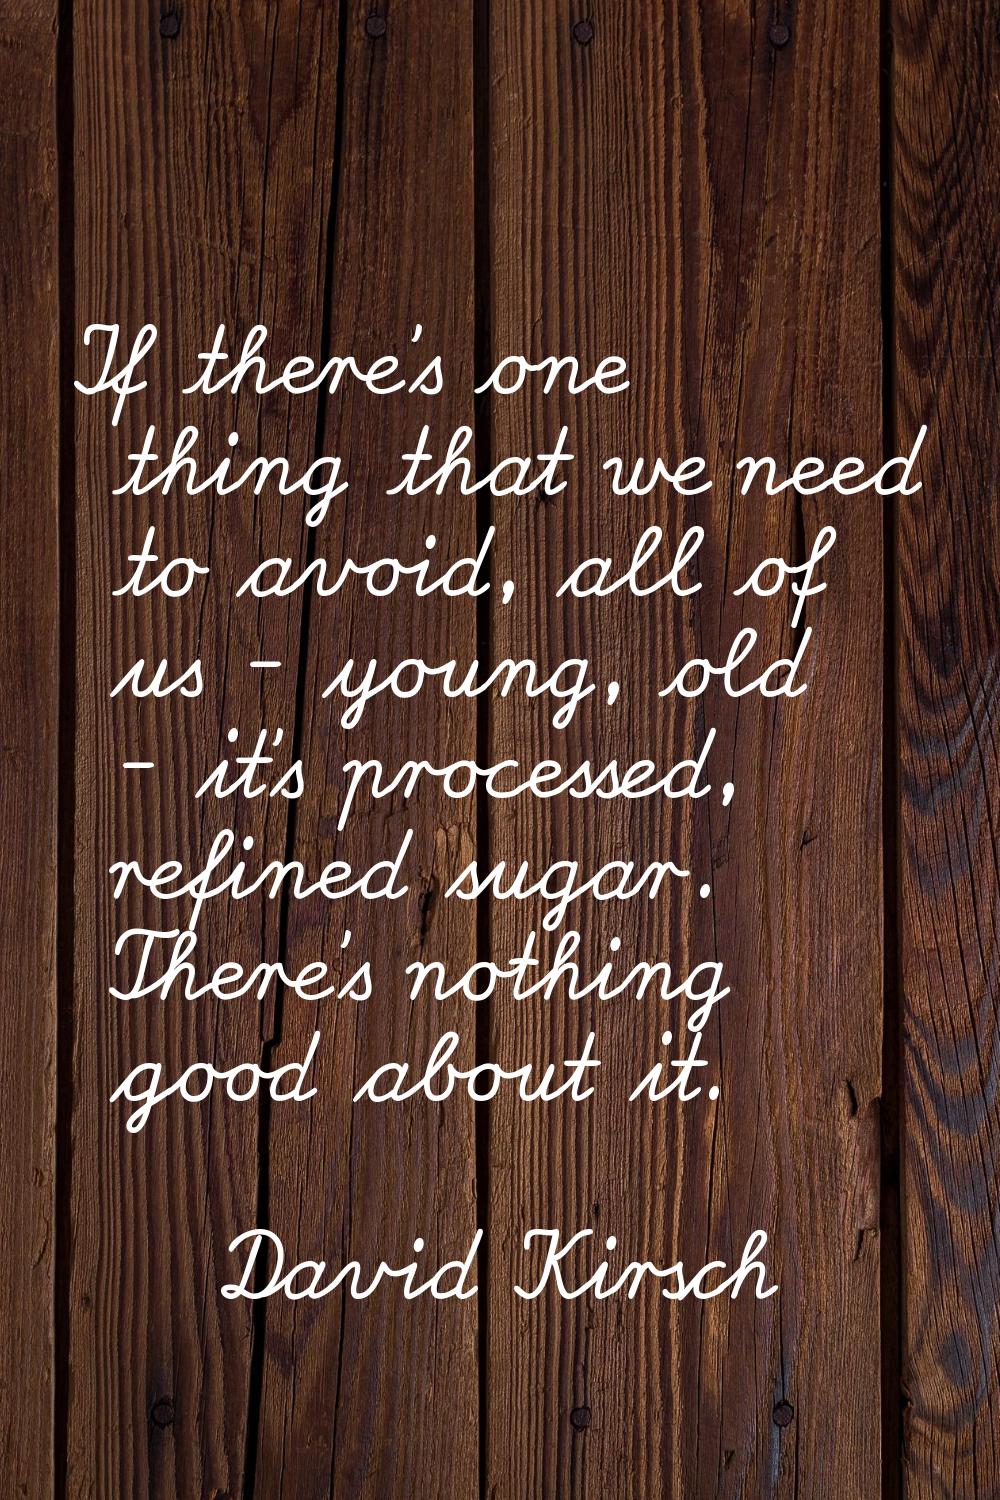 If there's one thing that we need to avoid, all of us - young, old - it's processed, refined sugar.